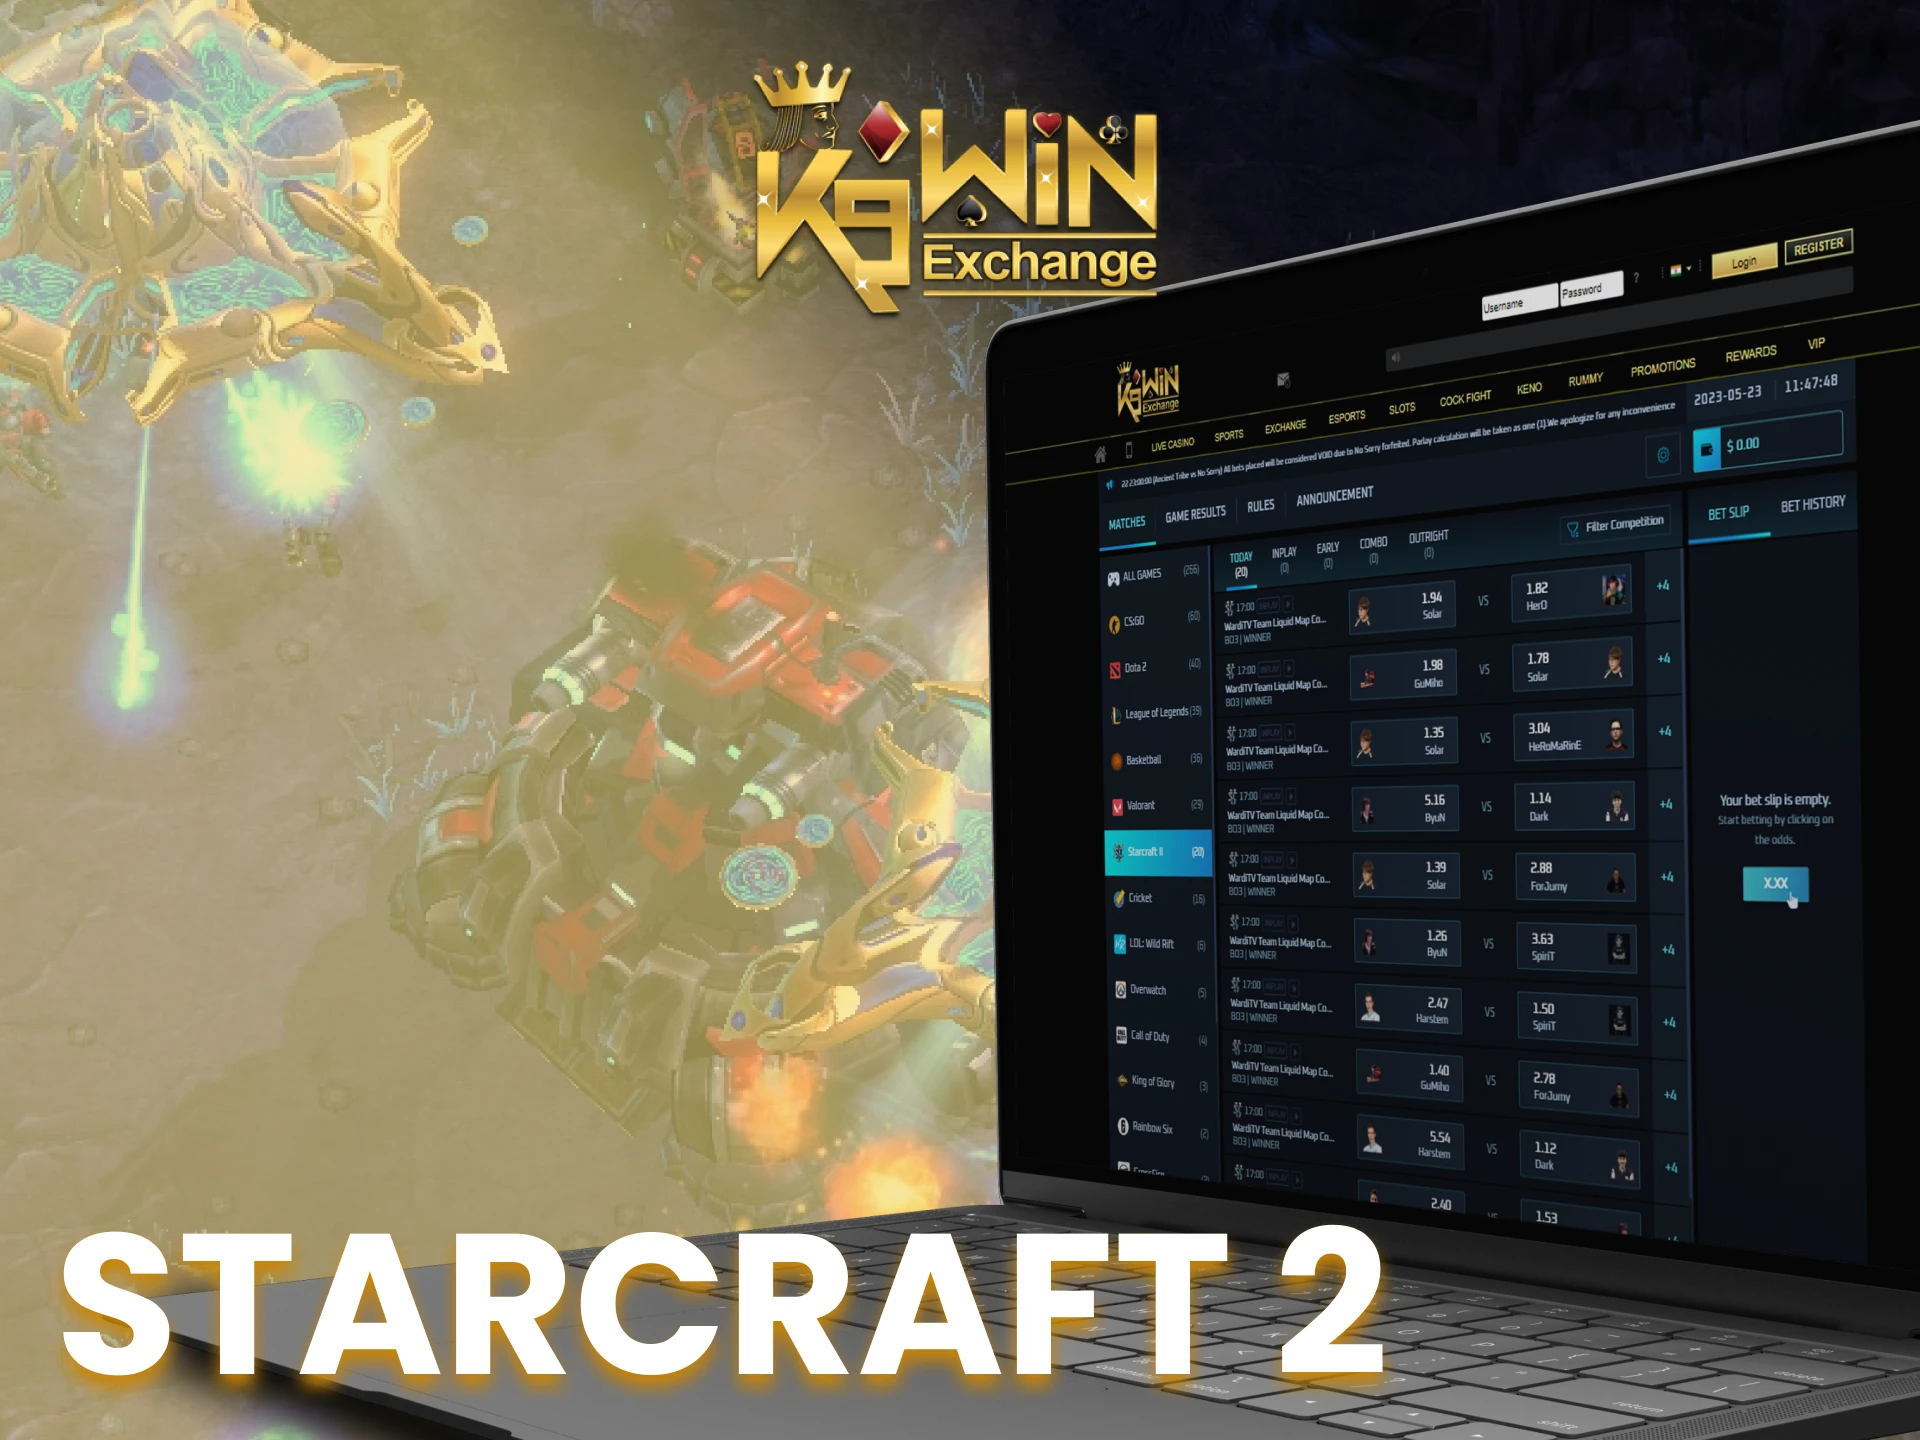 Bet on the most successful Starcraft 2 players at K9Win and win money.